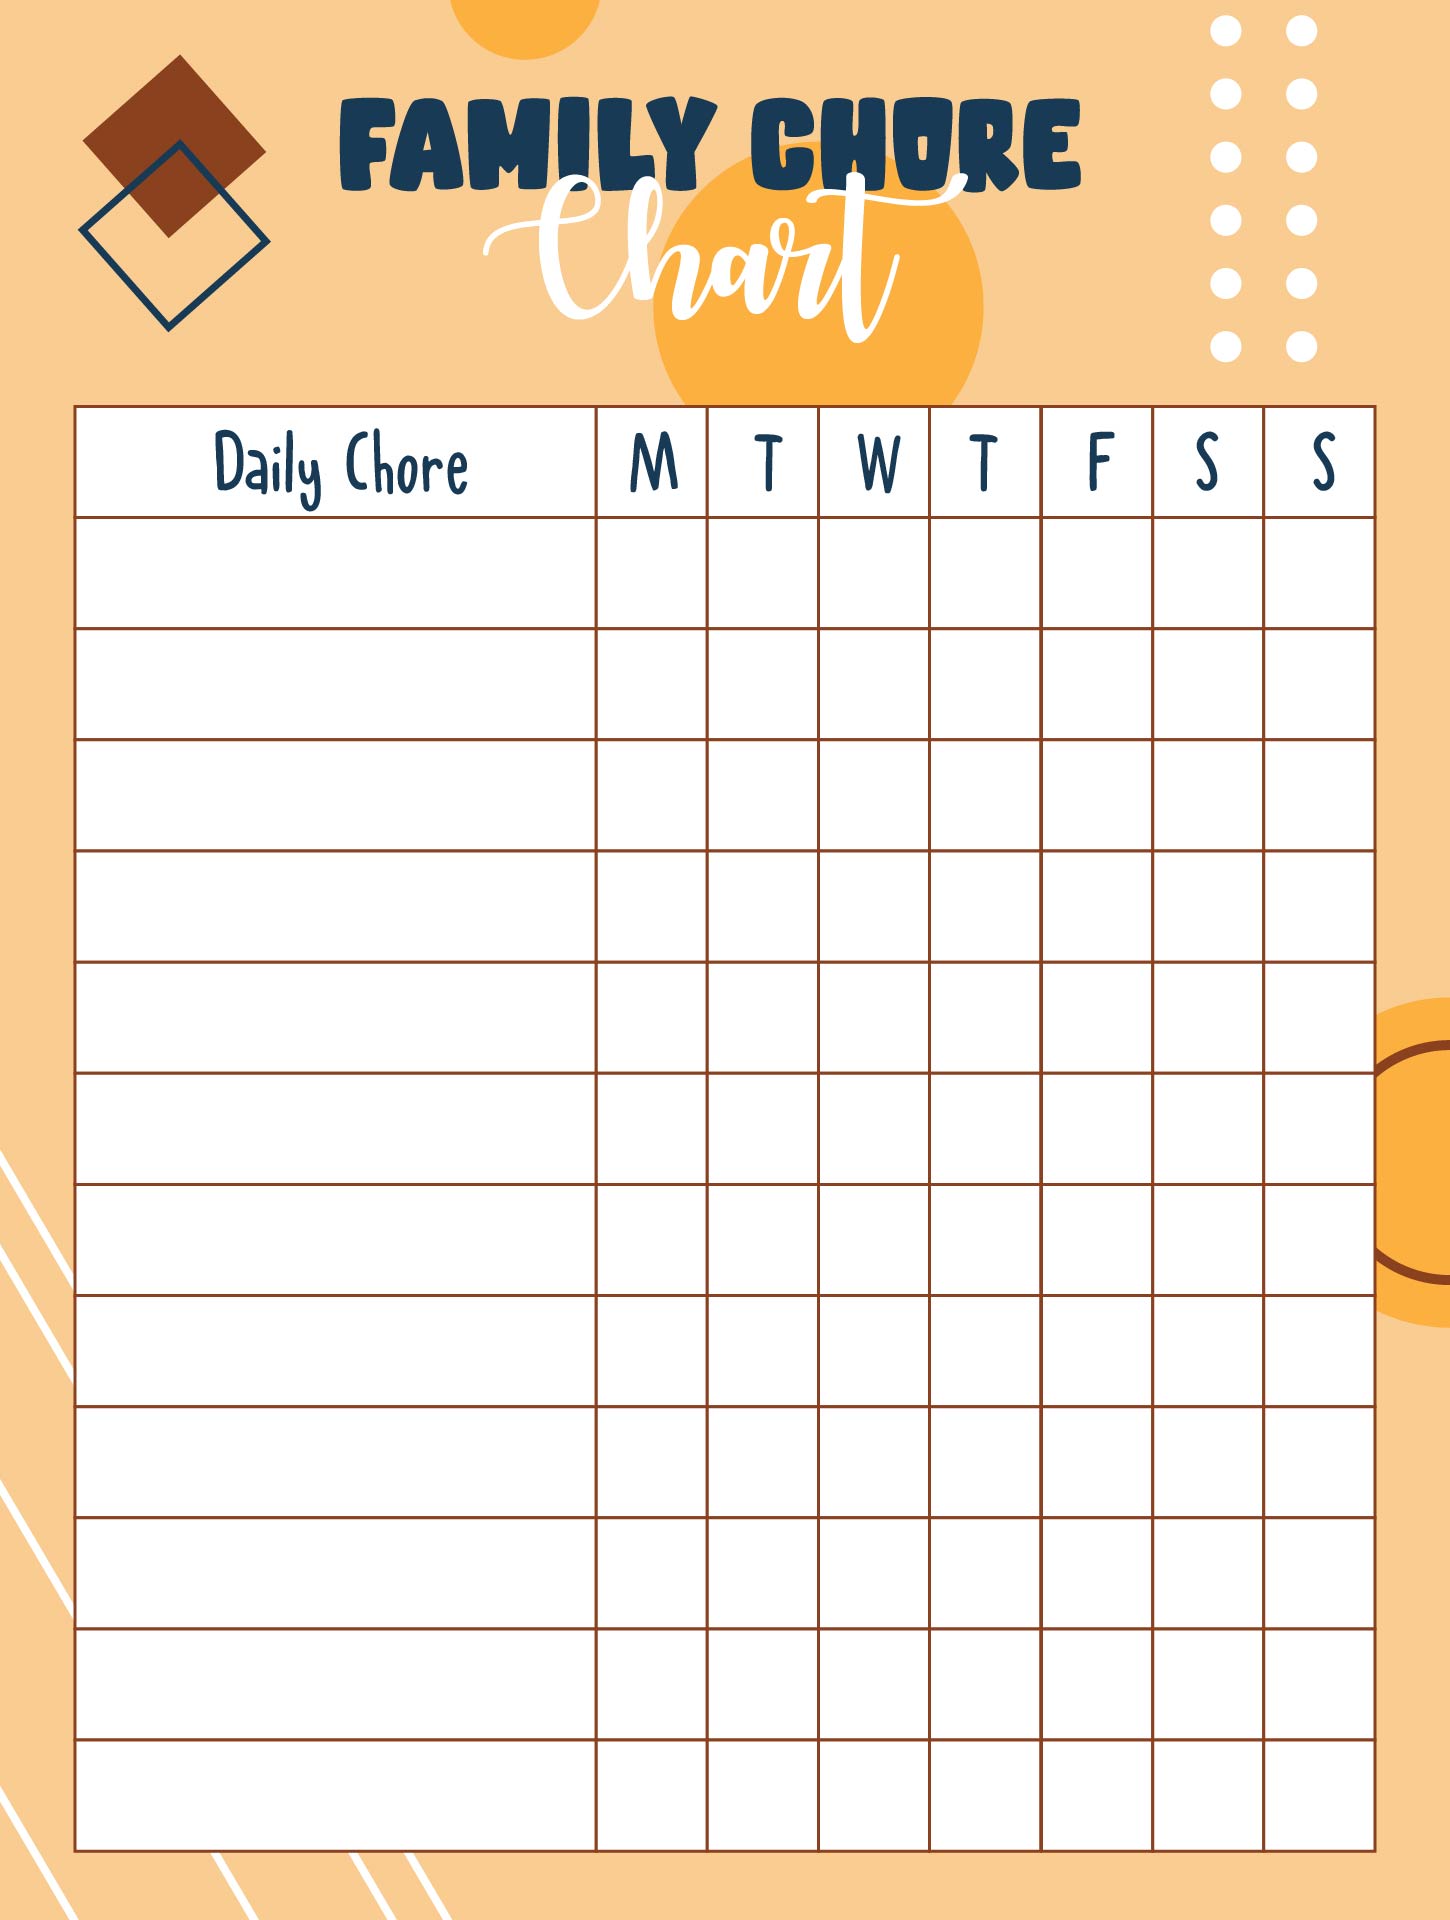 5-best-images-of-large-family-chore-chart-printable-family-chore